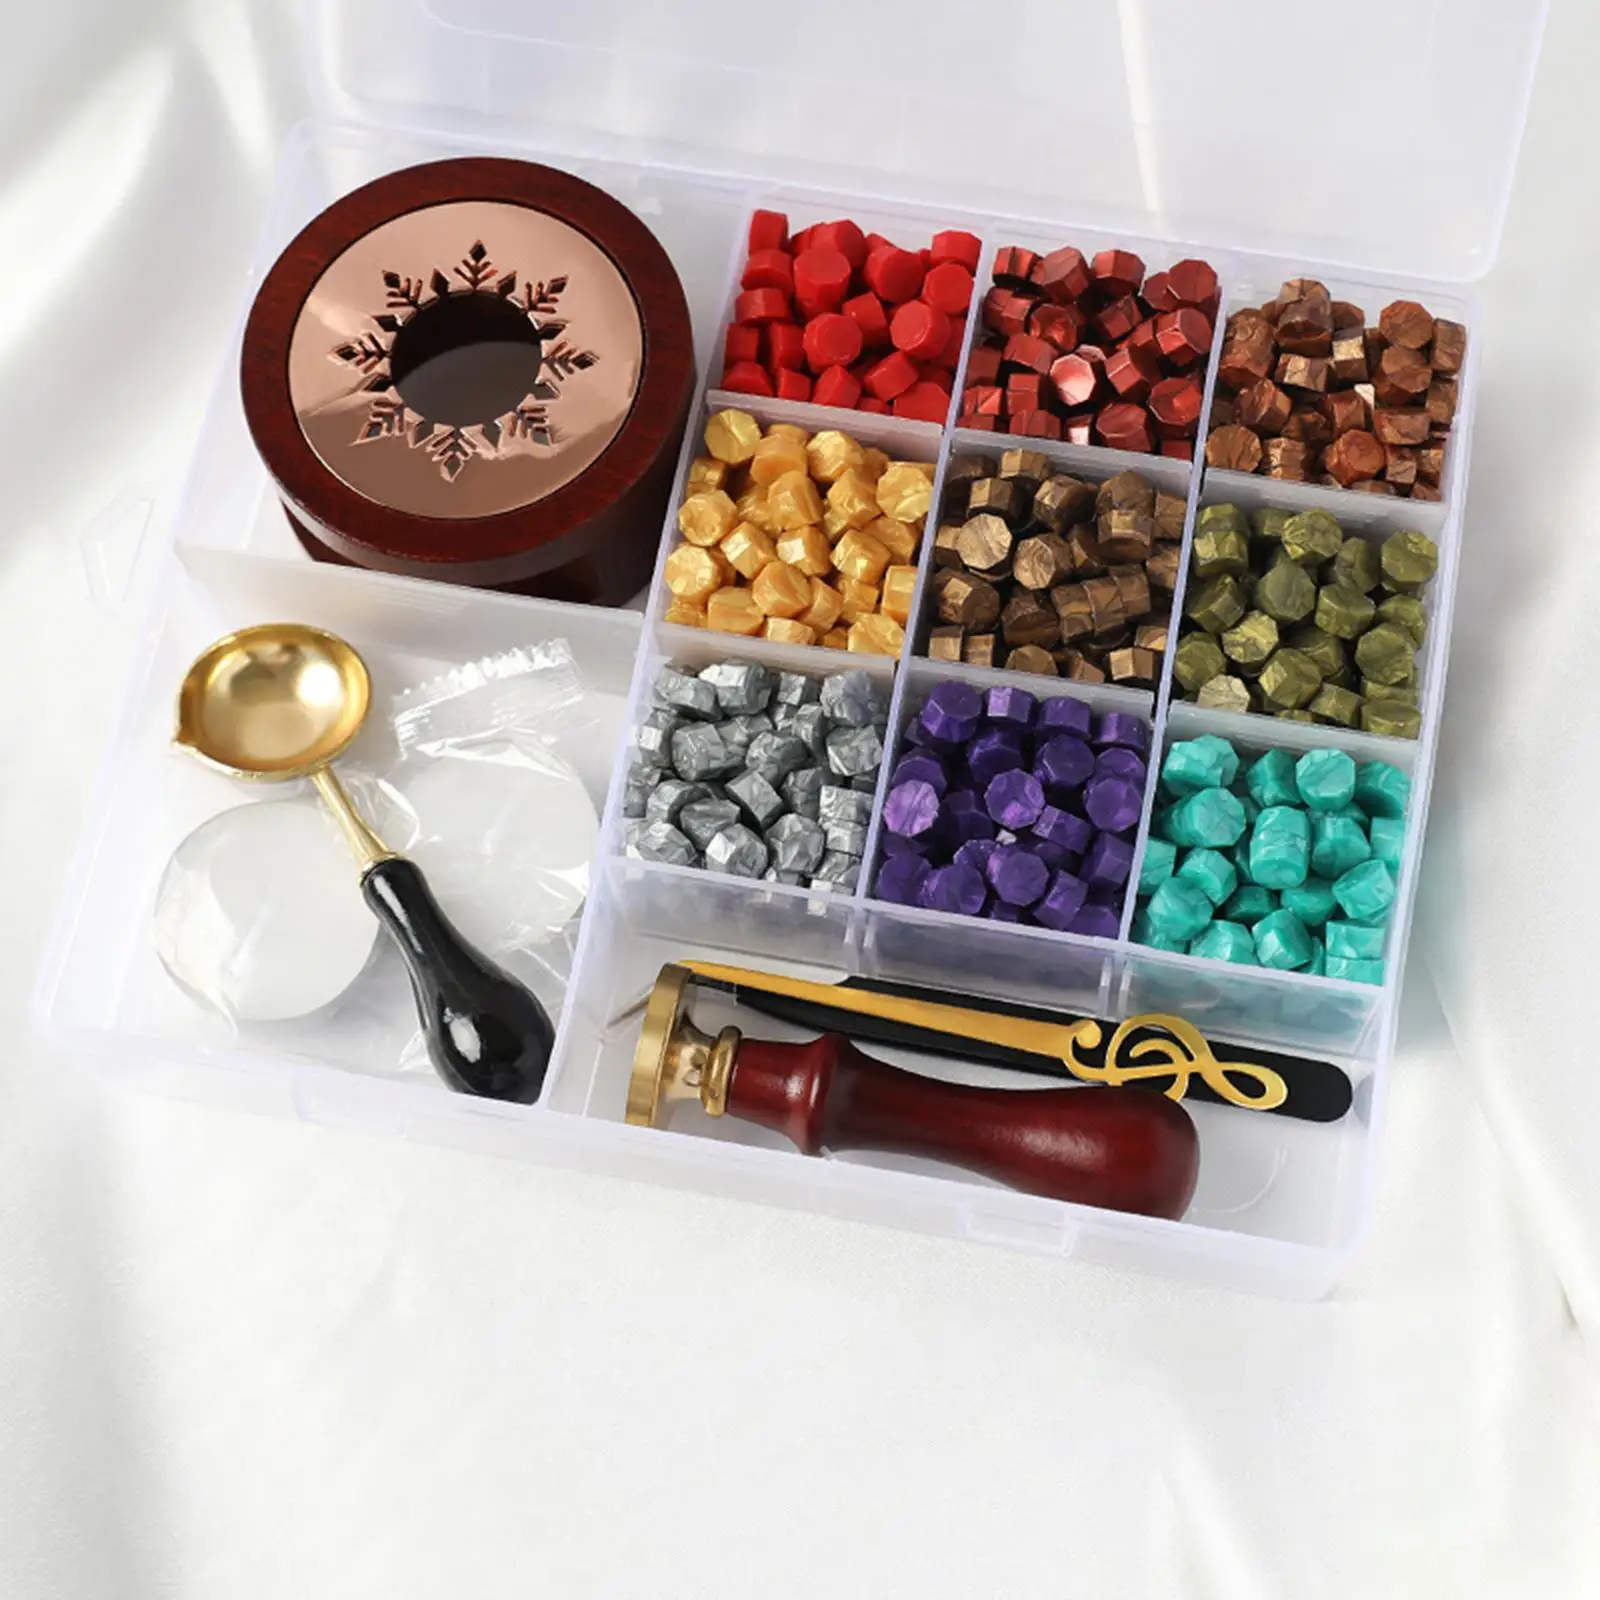 Wax Seal Kit W/Wax Seal Beads DIY Sealing Wax Beads Kit for Decoration Wedding Invitations Crafts Letters Sealing Envelope Stamp